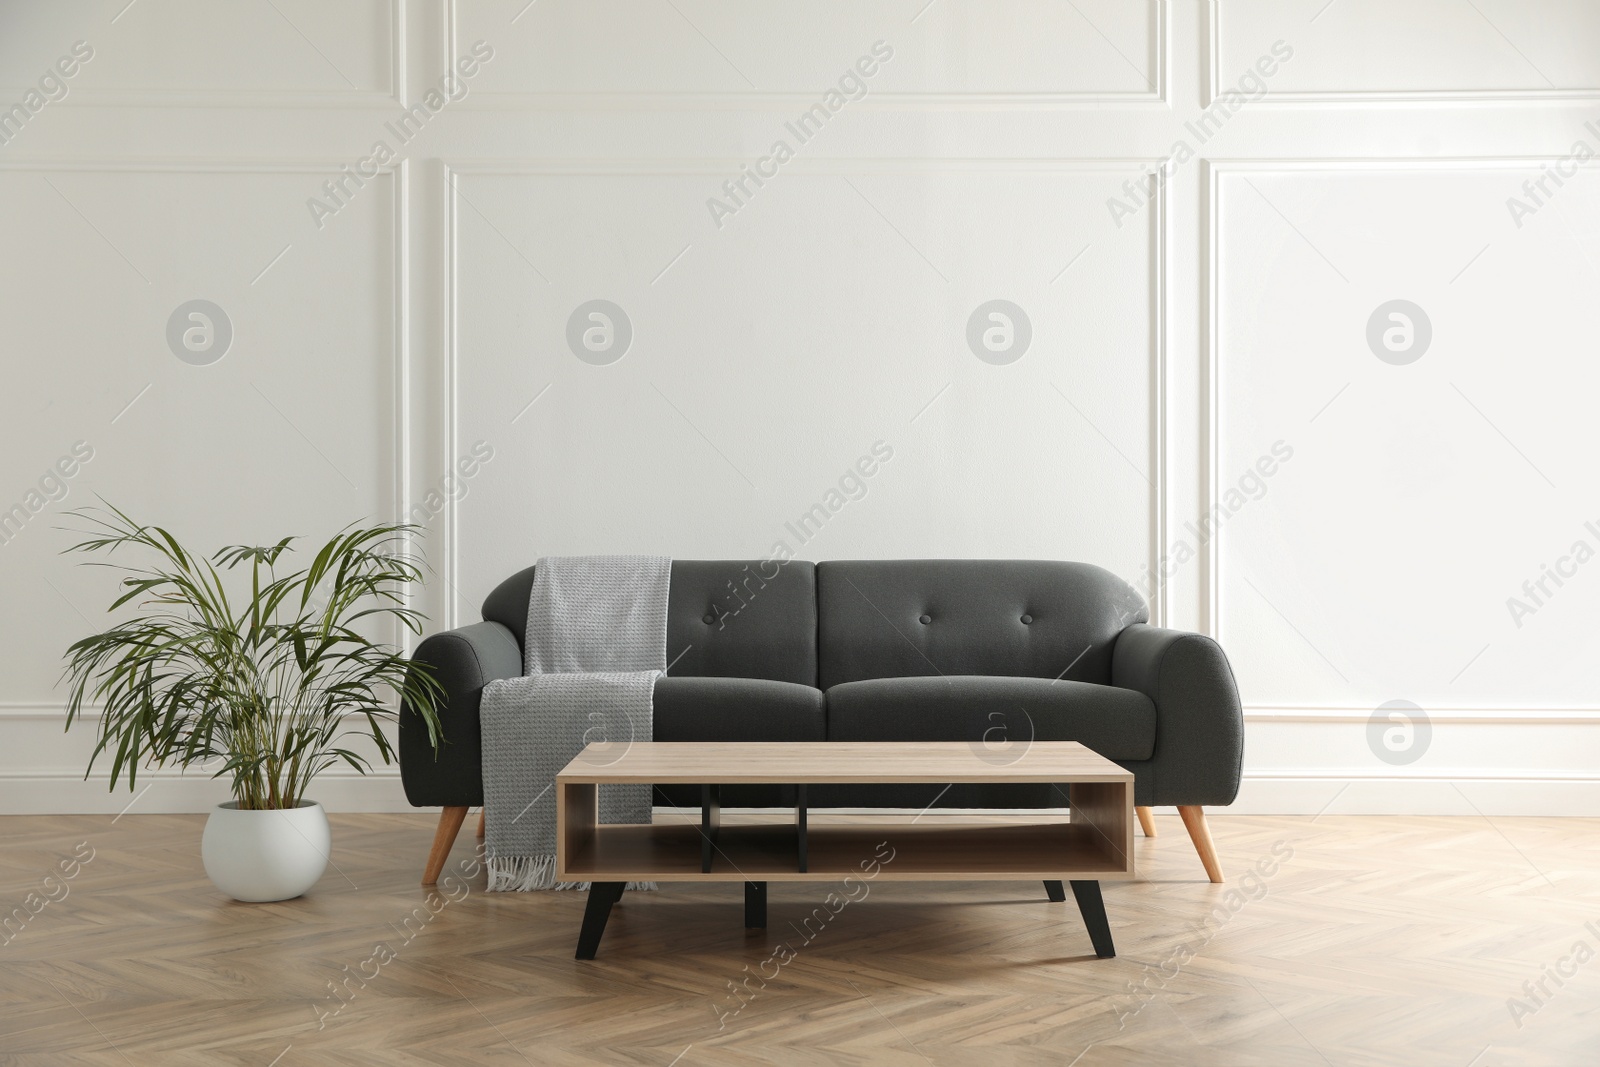 Photo of Stylish living room interior with comfortable grey sofa and wooden table